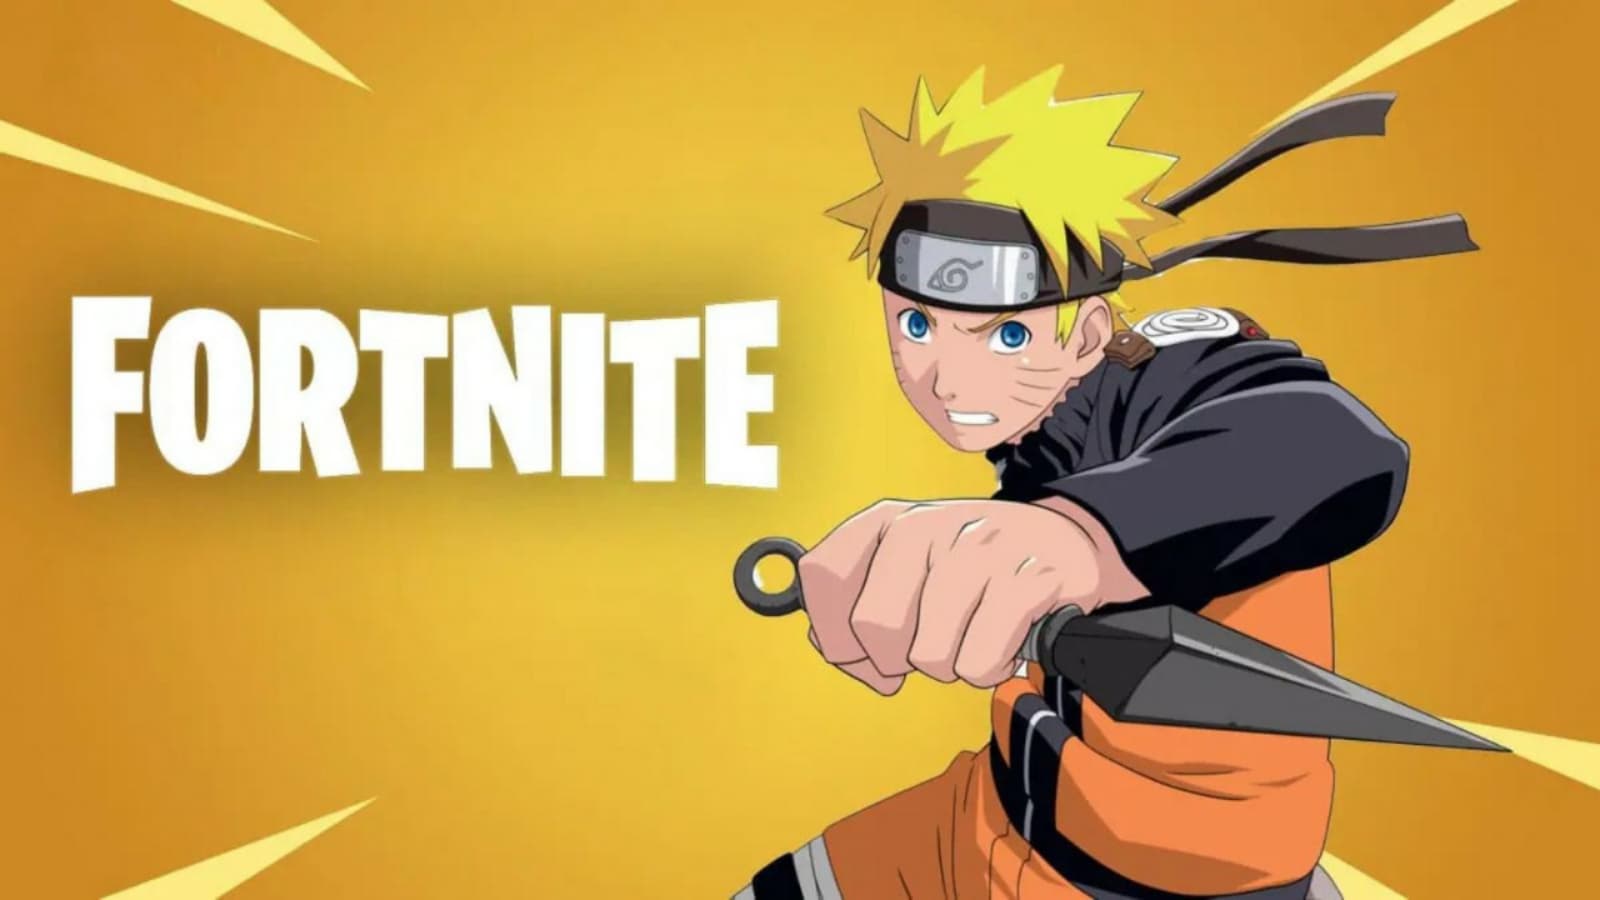 Fortnite Naruto Collaboration: Release Date of the Iconic Crossover FirstSportz